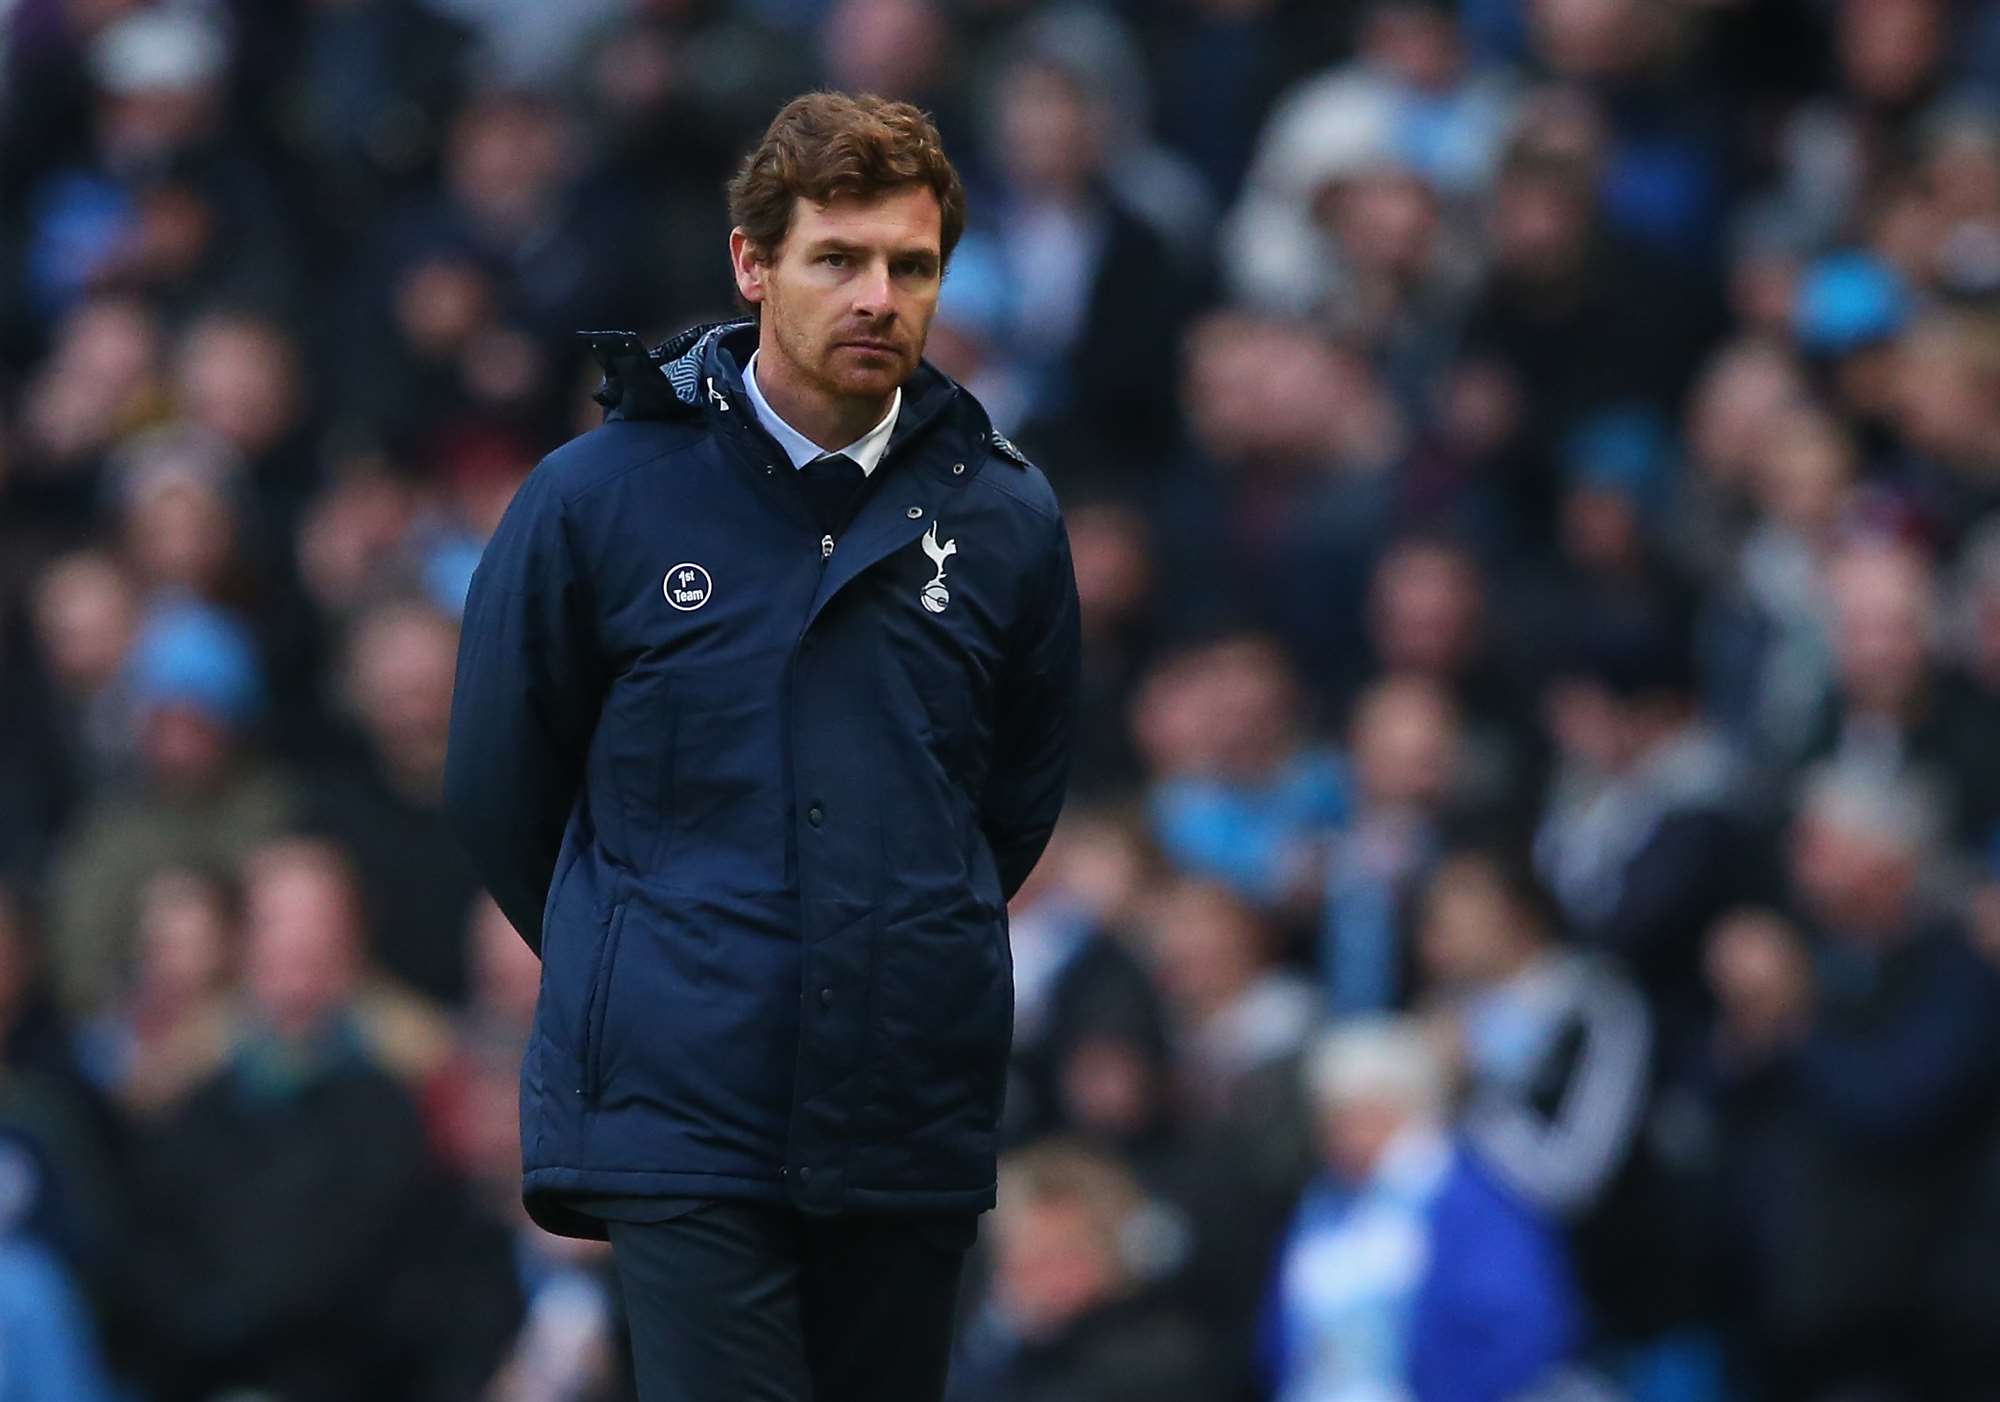 Villas-Boas wants Spurs to look ahead after City thrashing -